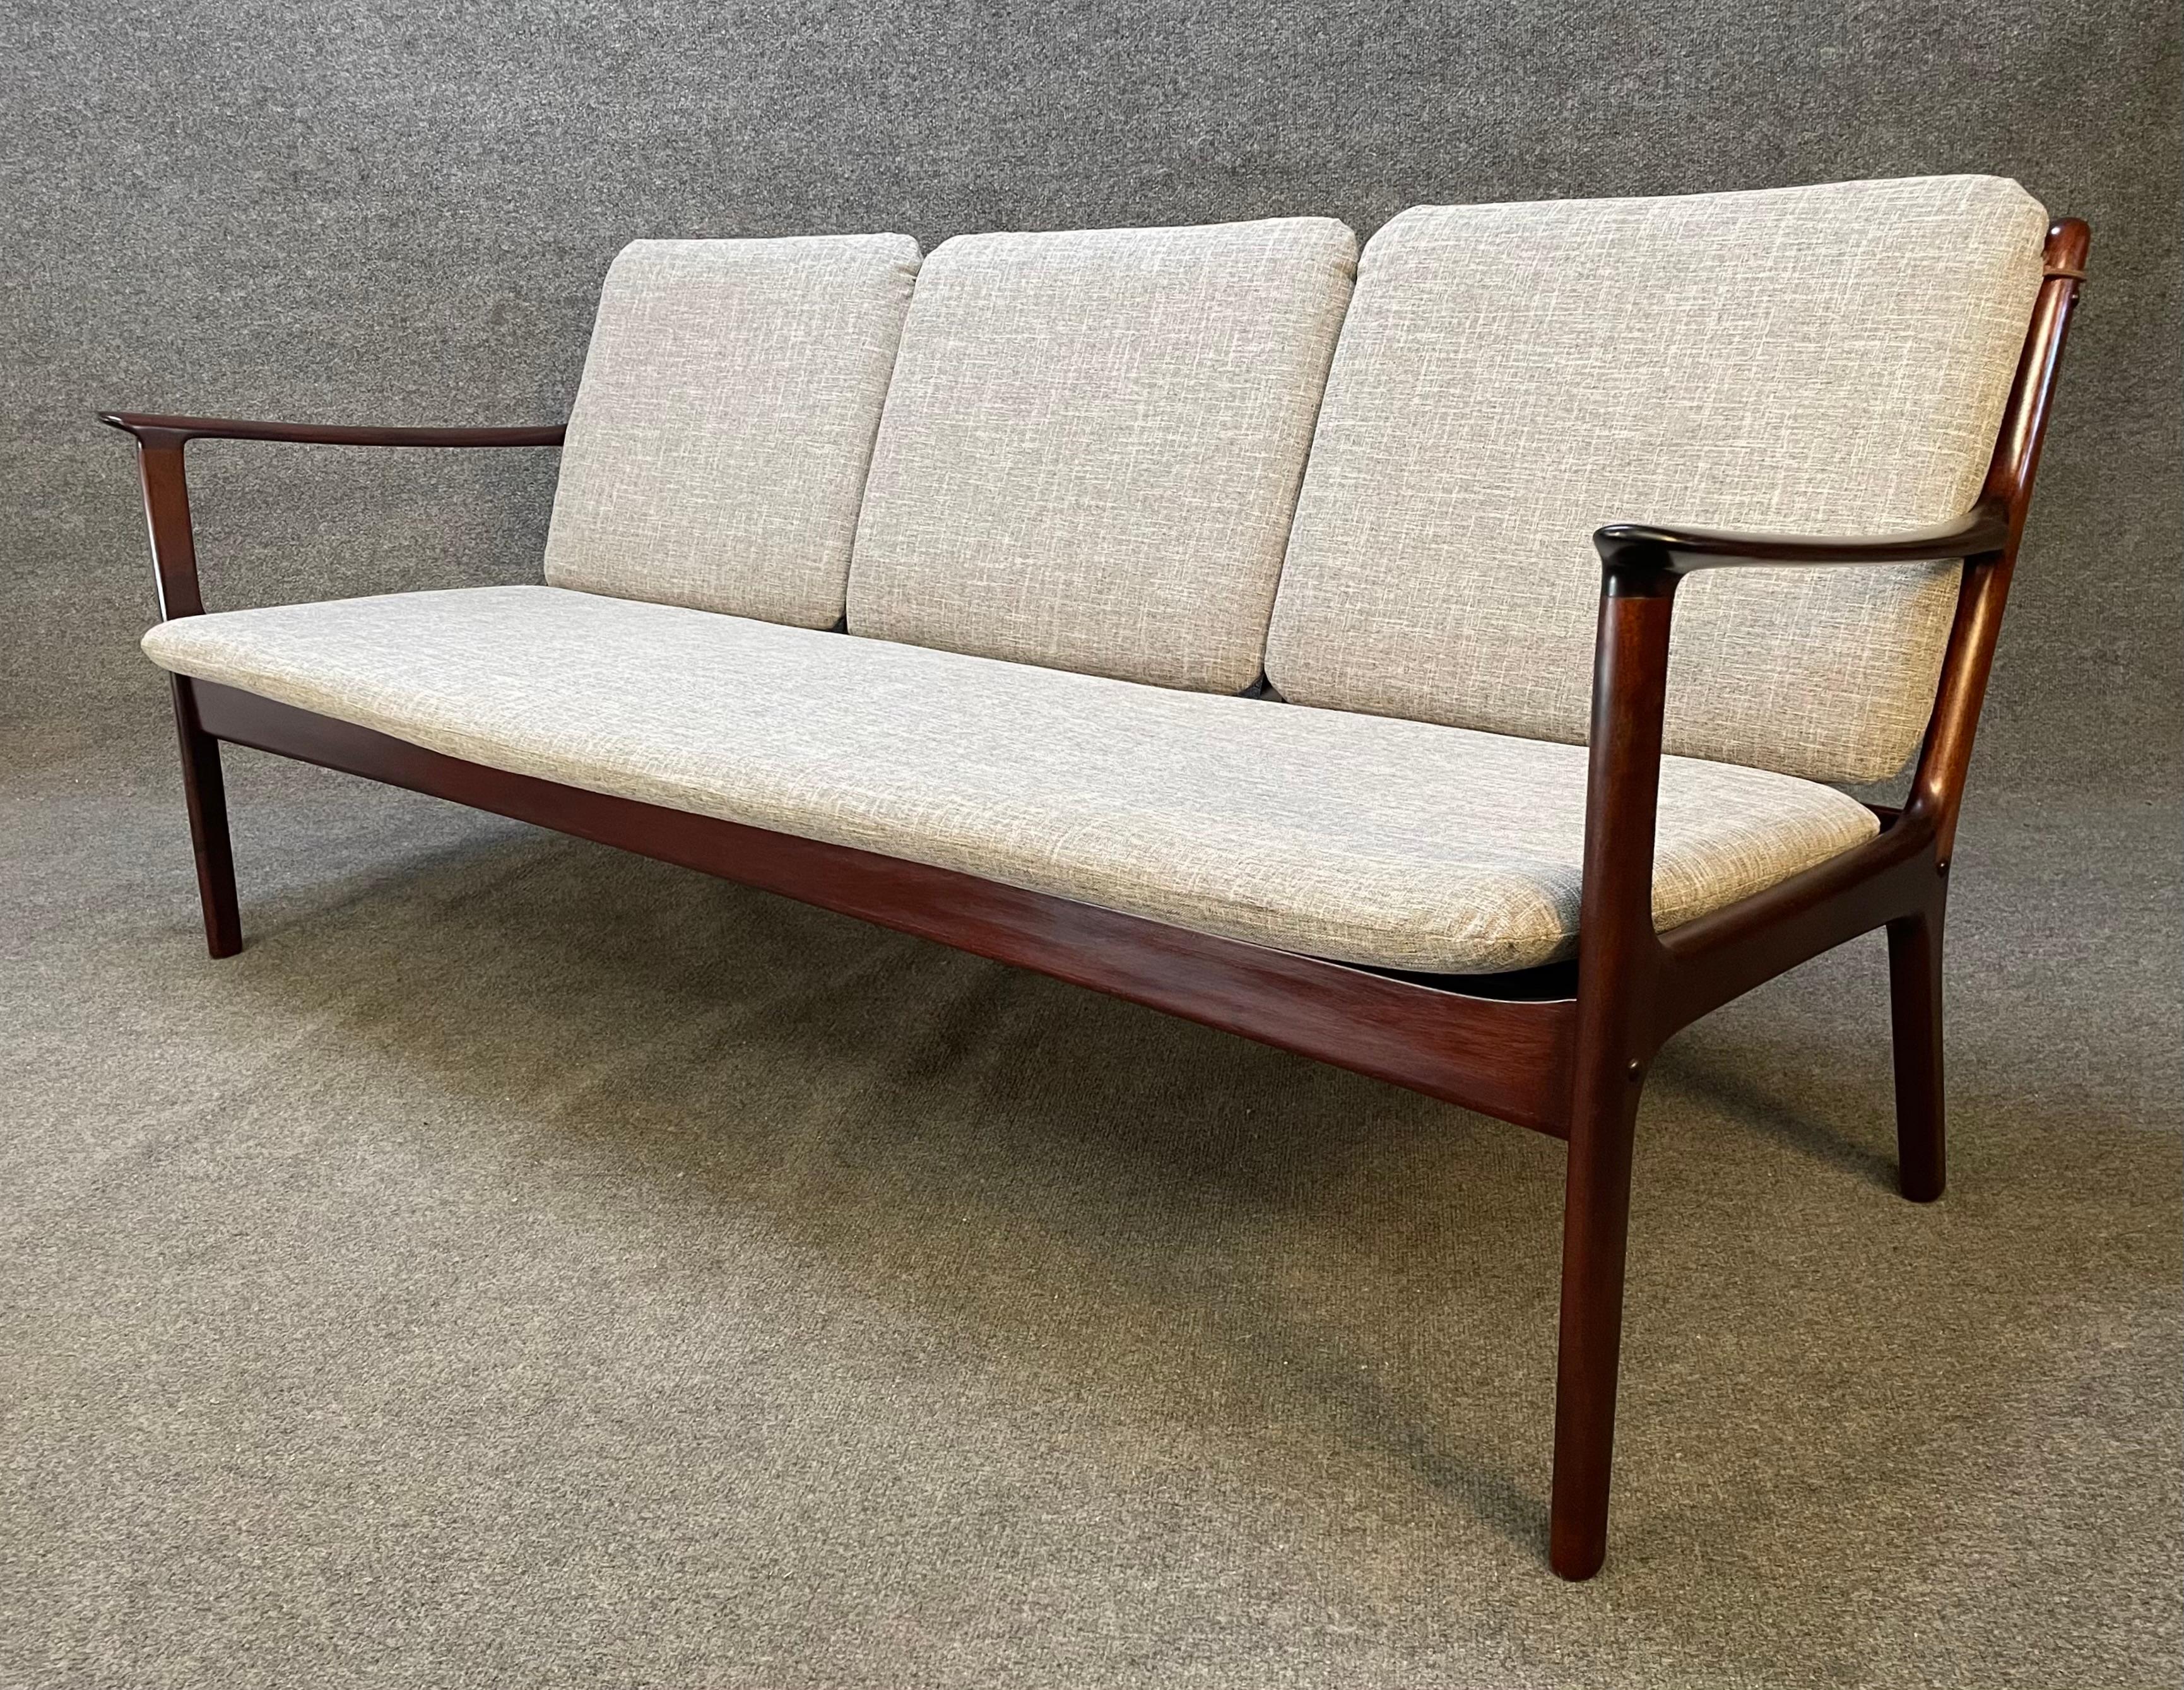 Scandinavian Modern Vintage Danish Mid Century Mahogany Sofa by Ole Wanscher for Poul Jeppesen For Sale